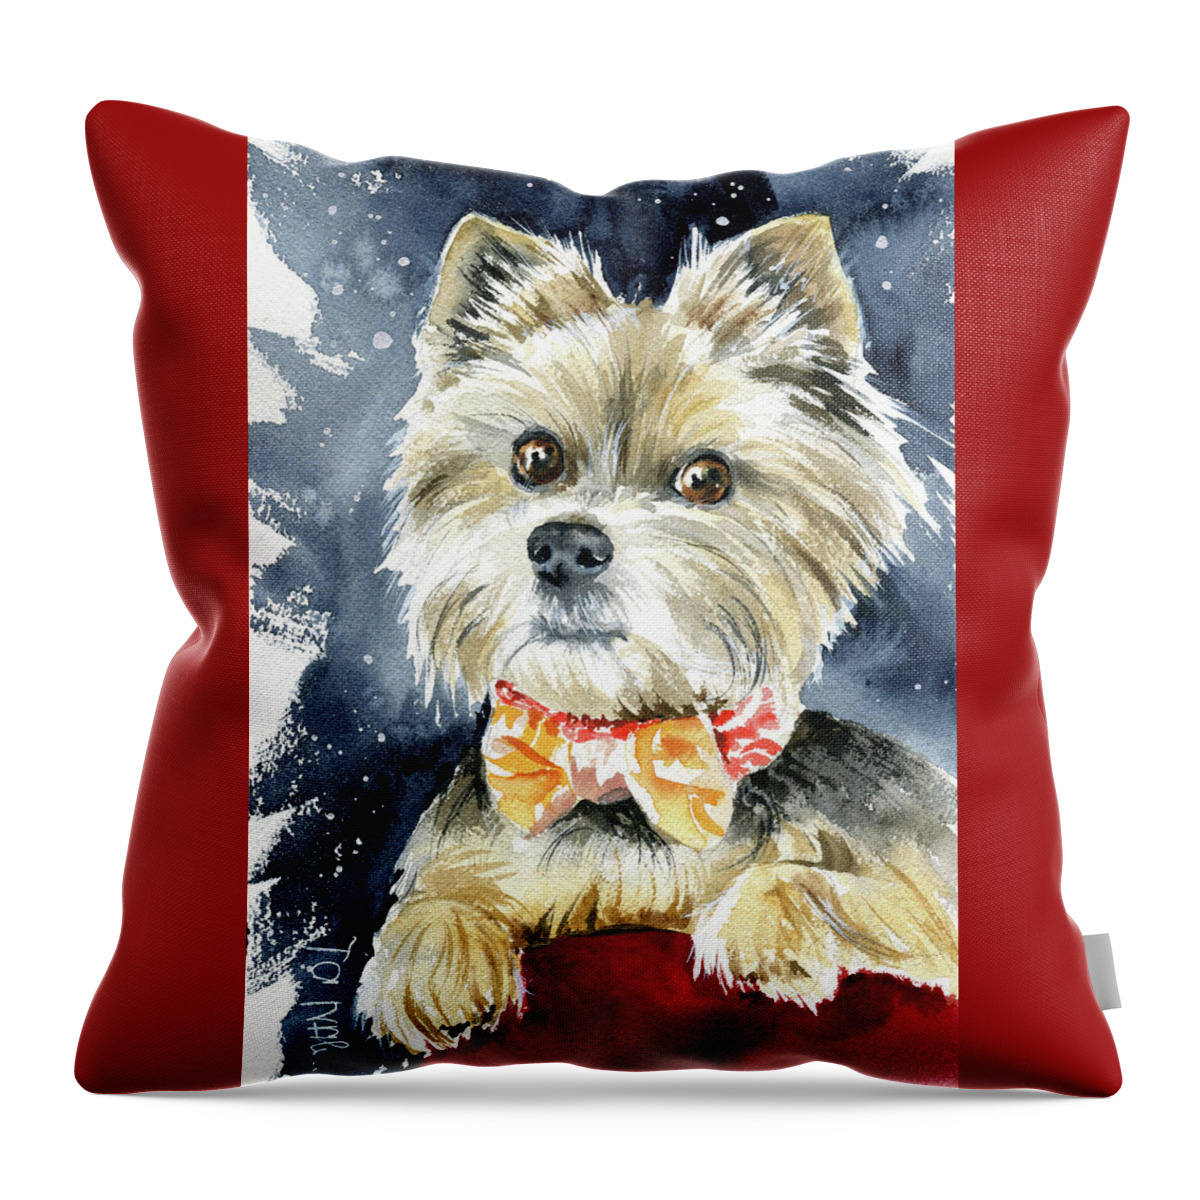 Yorkshire Throw Pillow featuring the painting Guido Yorkshire Terrier Dog Painting by Dora Hathazi Mendes